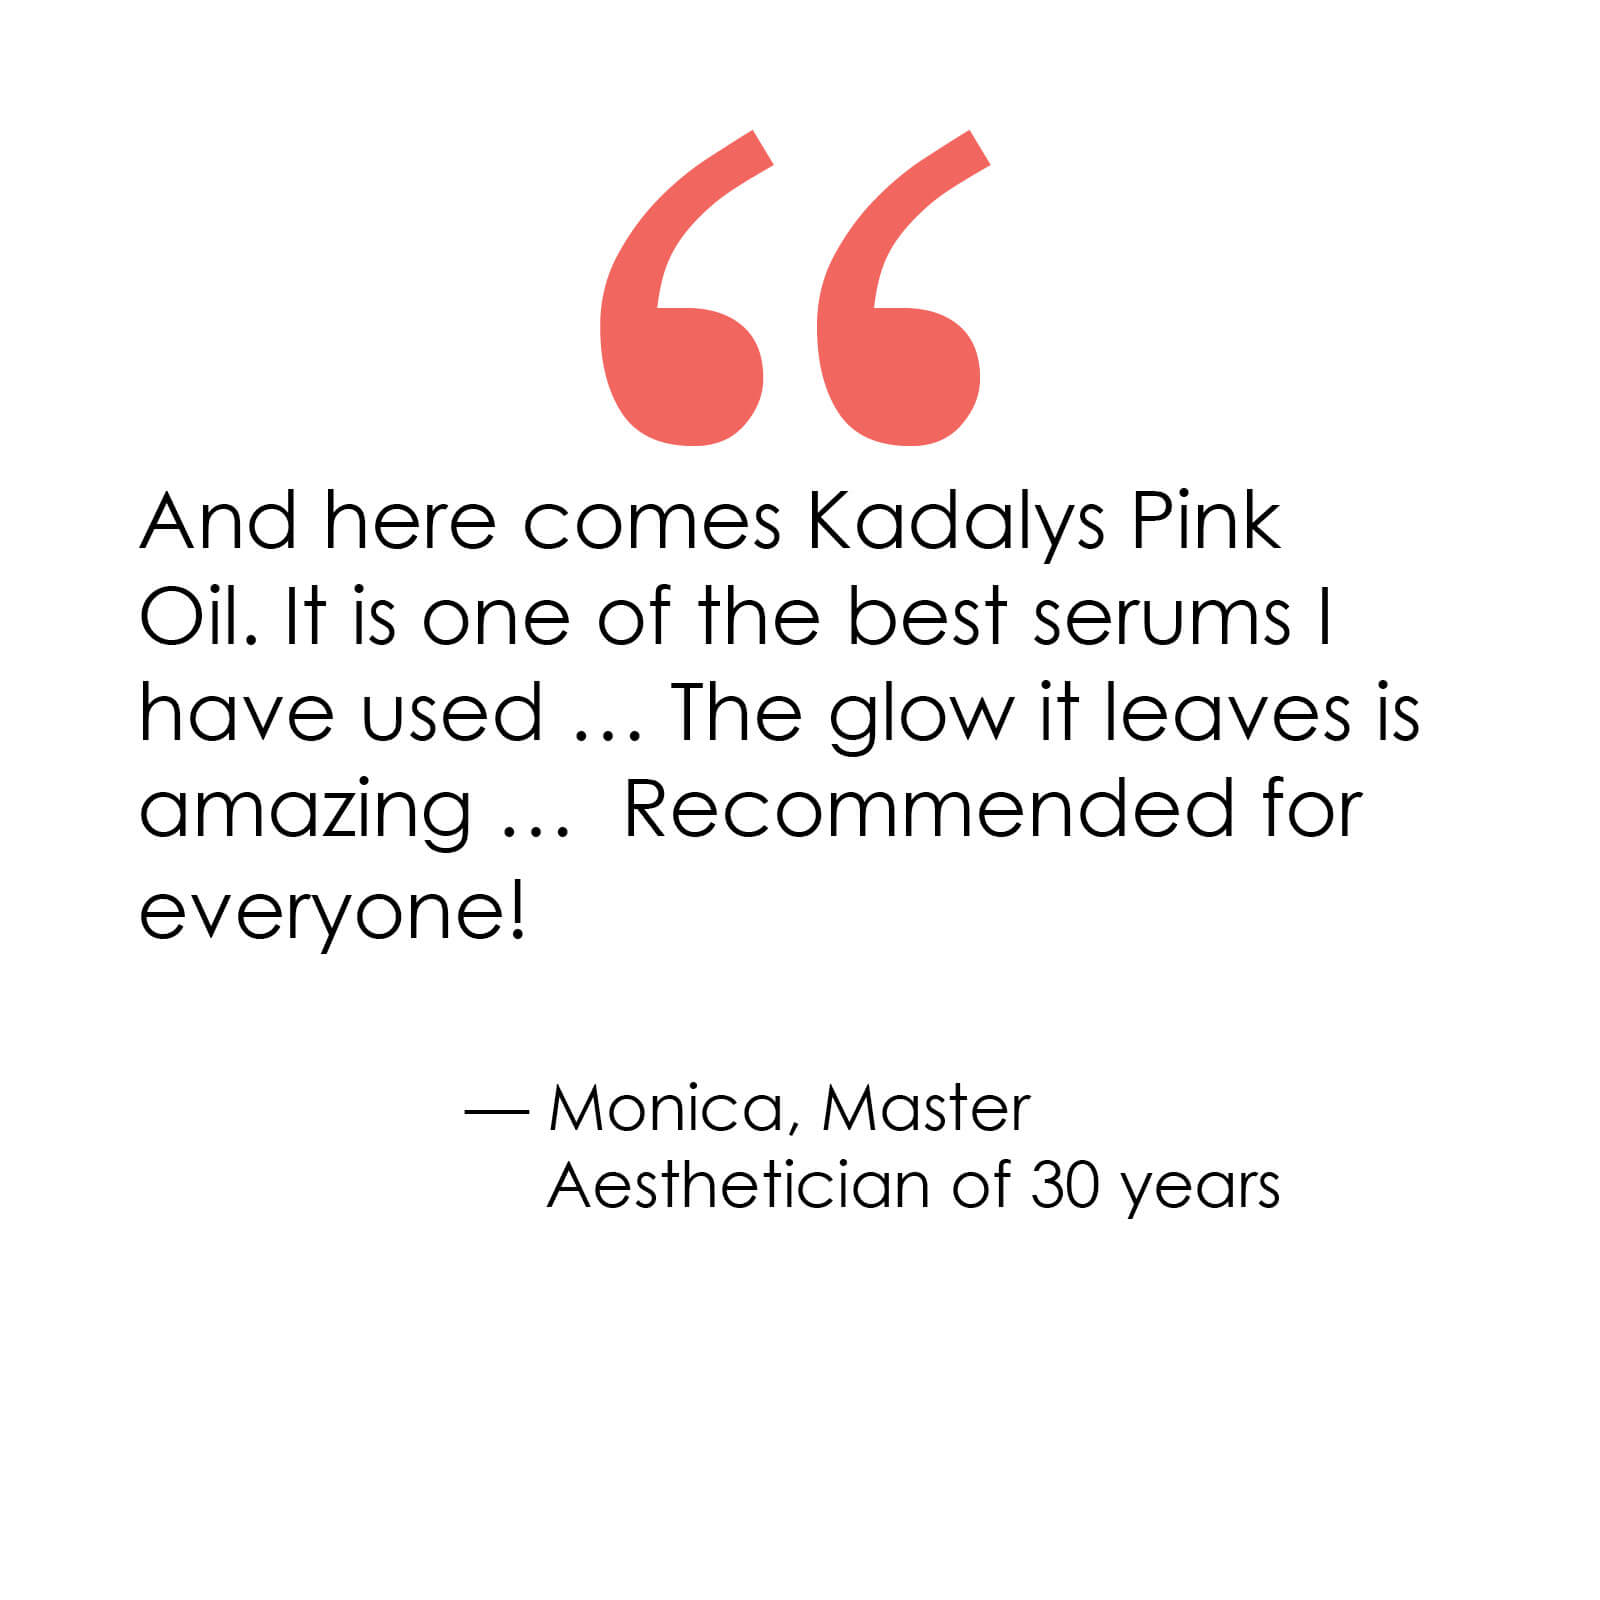 Review by aesthetician